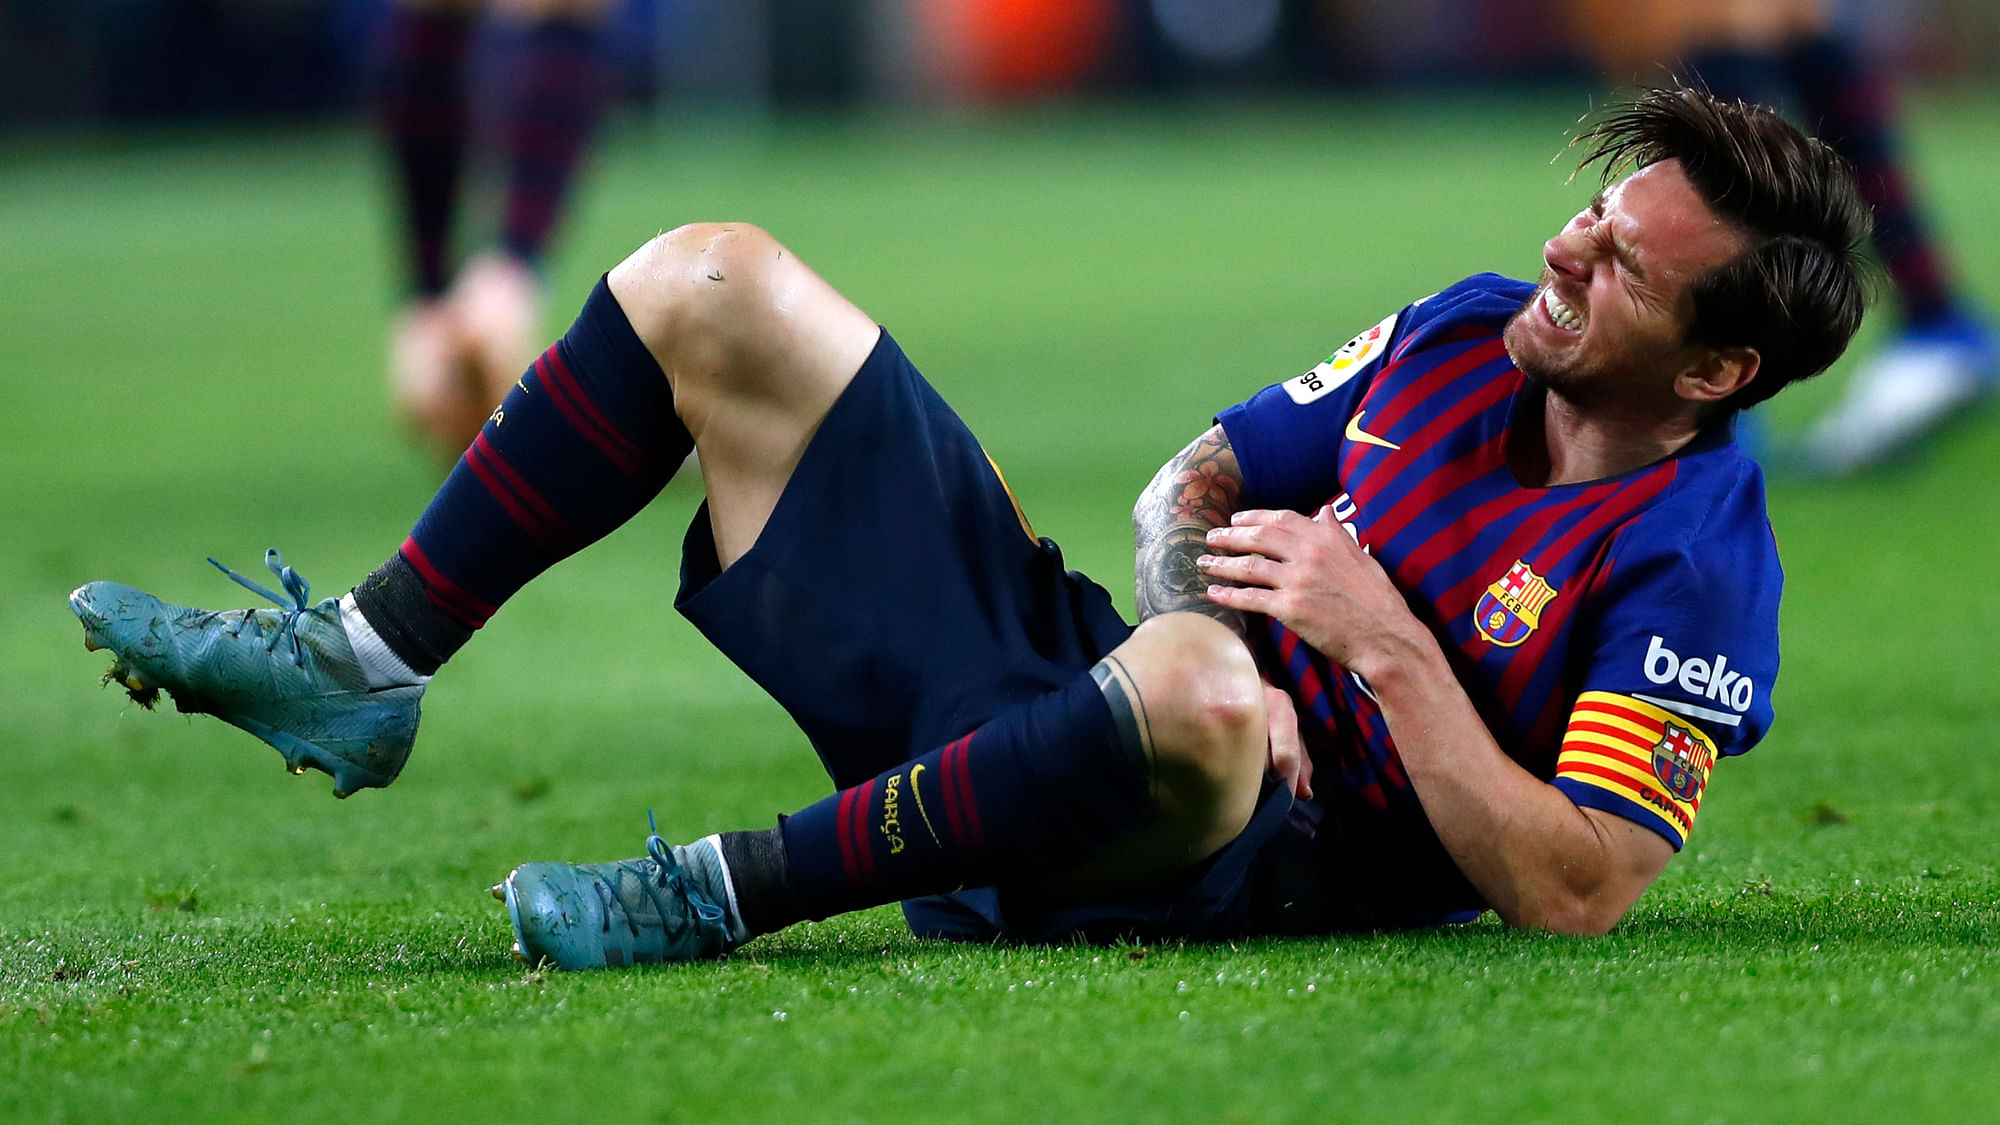 Lionel Messi has broken a bone in his right arm and will be sidelined for about three weeks.